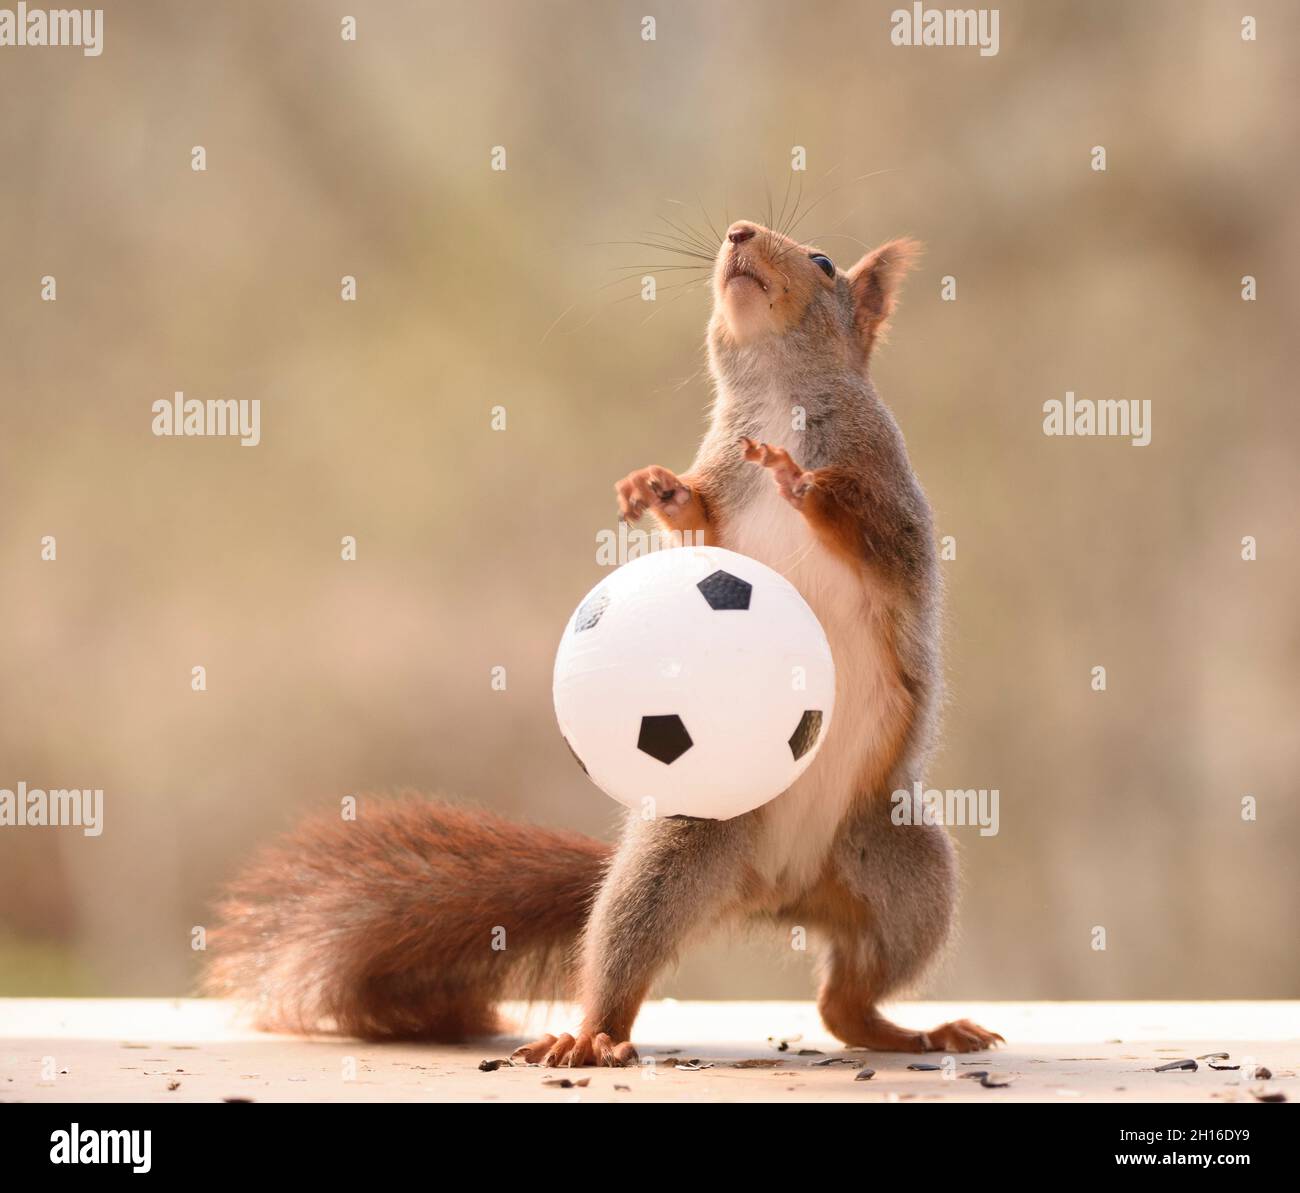 red squirrel is catching a ball Stock Photo